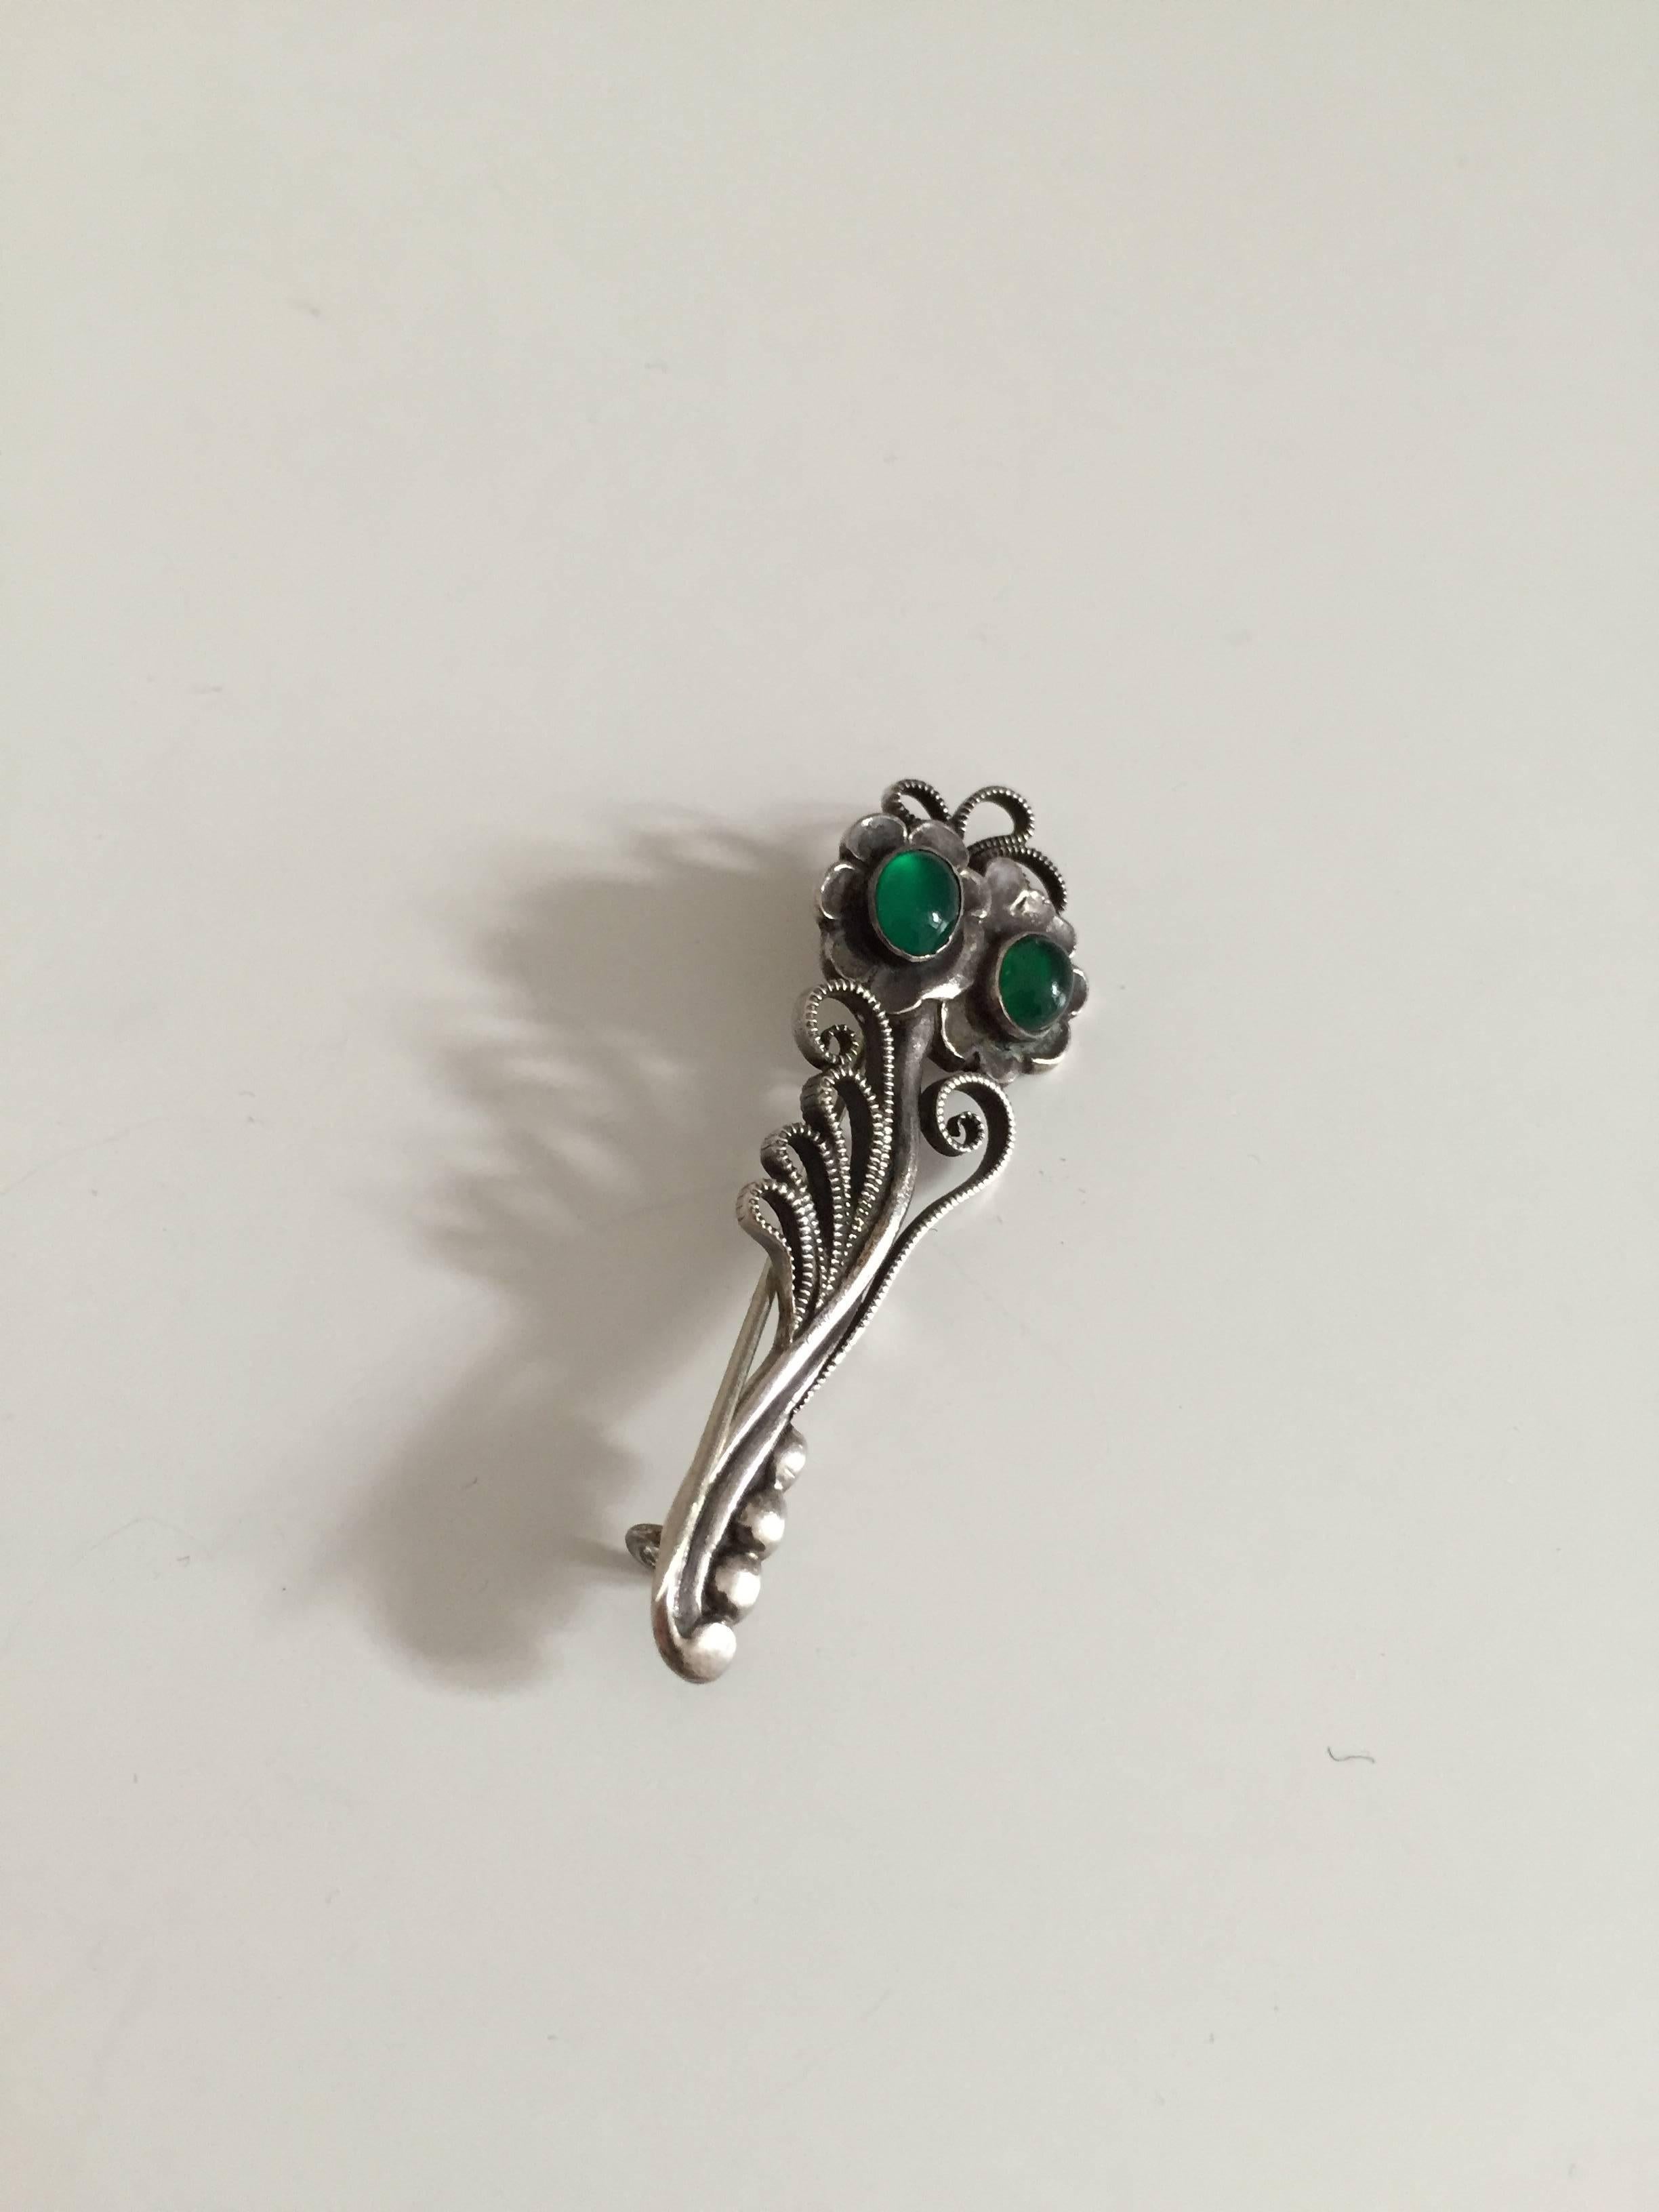 Georg Jensen sterling silver brooch with green agat #182 from 1910-1920. Is in good used condition.

Measures 5.3 cm (2 3/32